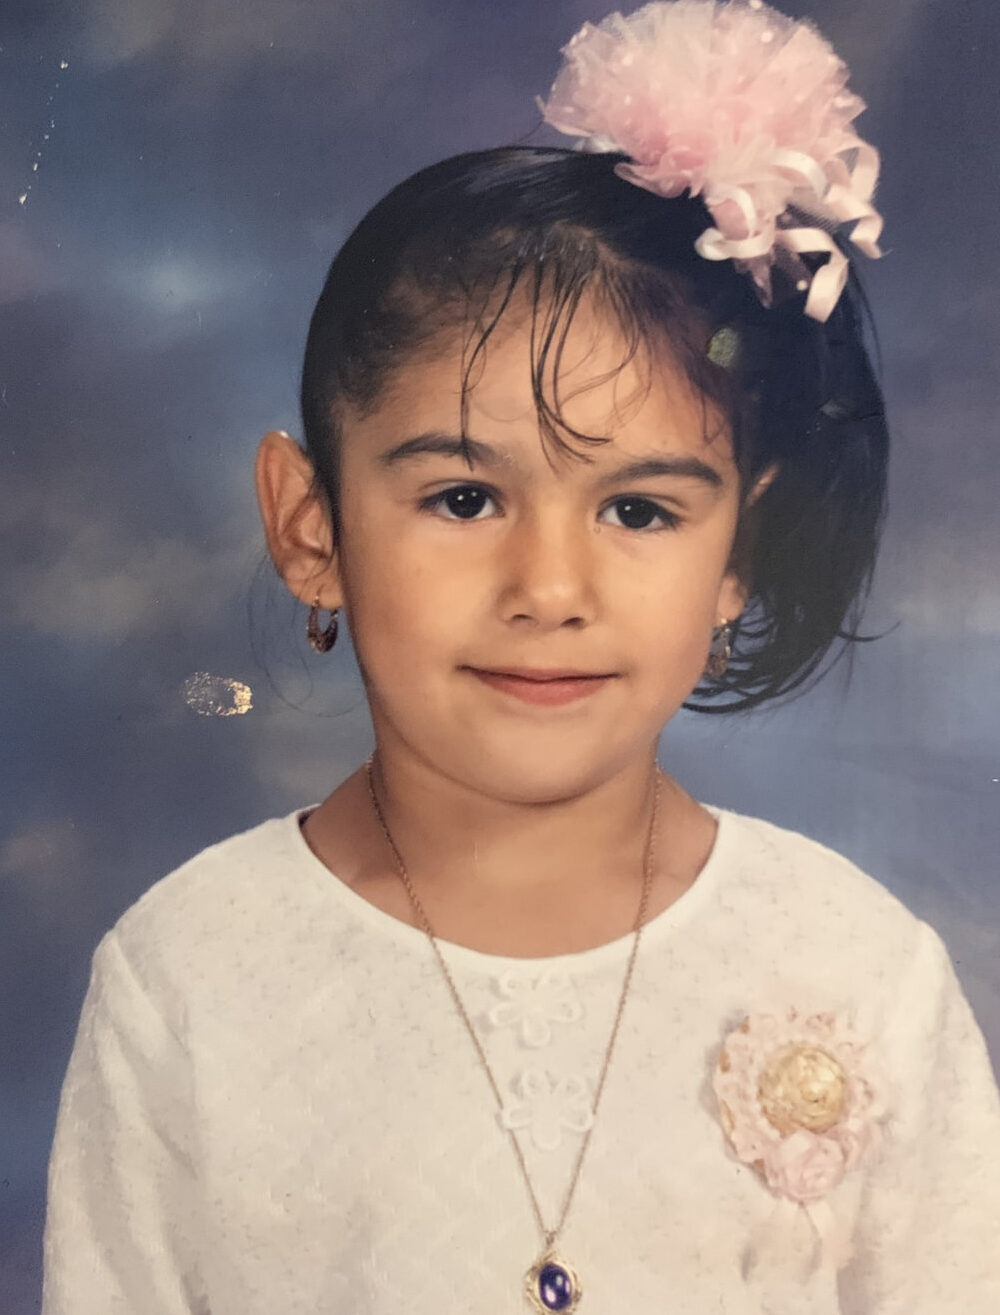 A young girl with a side ponytail and a pink bow up top smiles for a school photo.